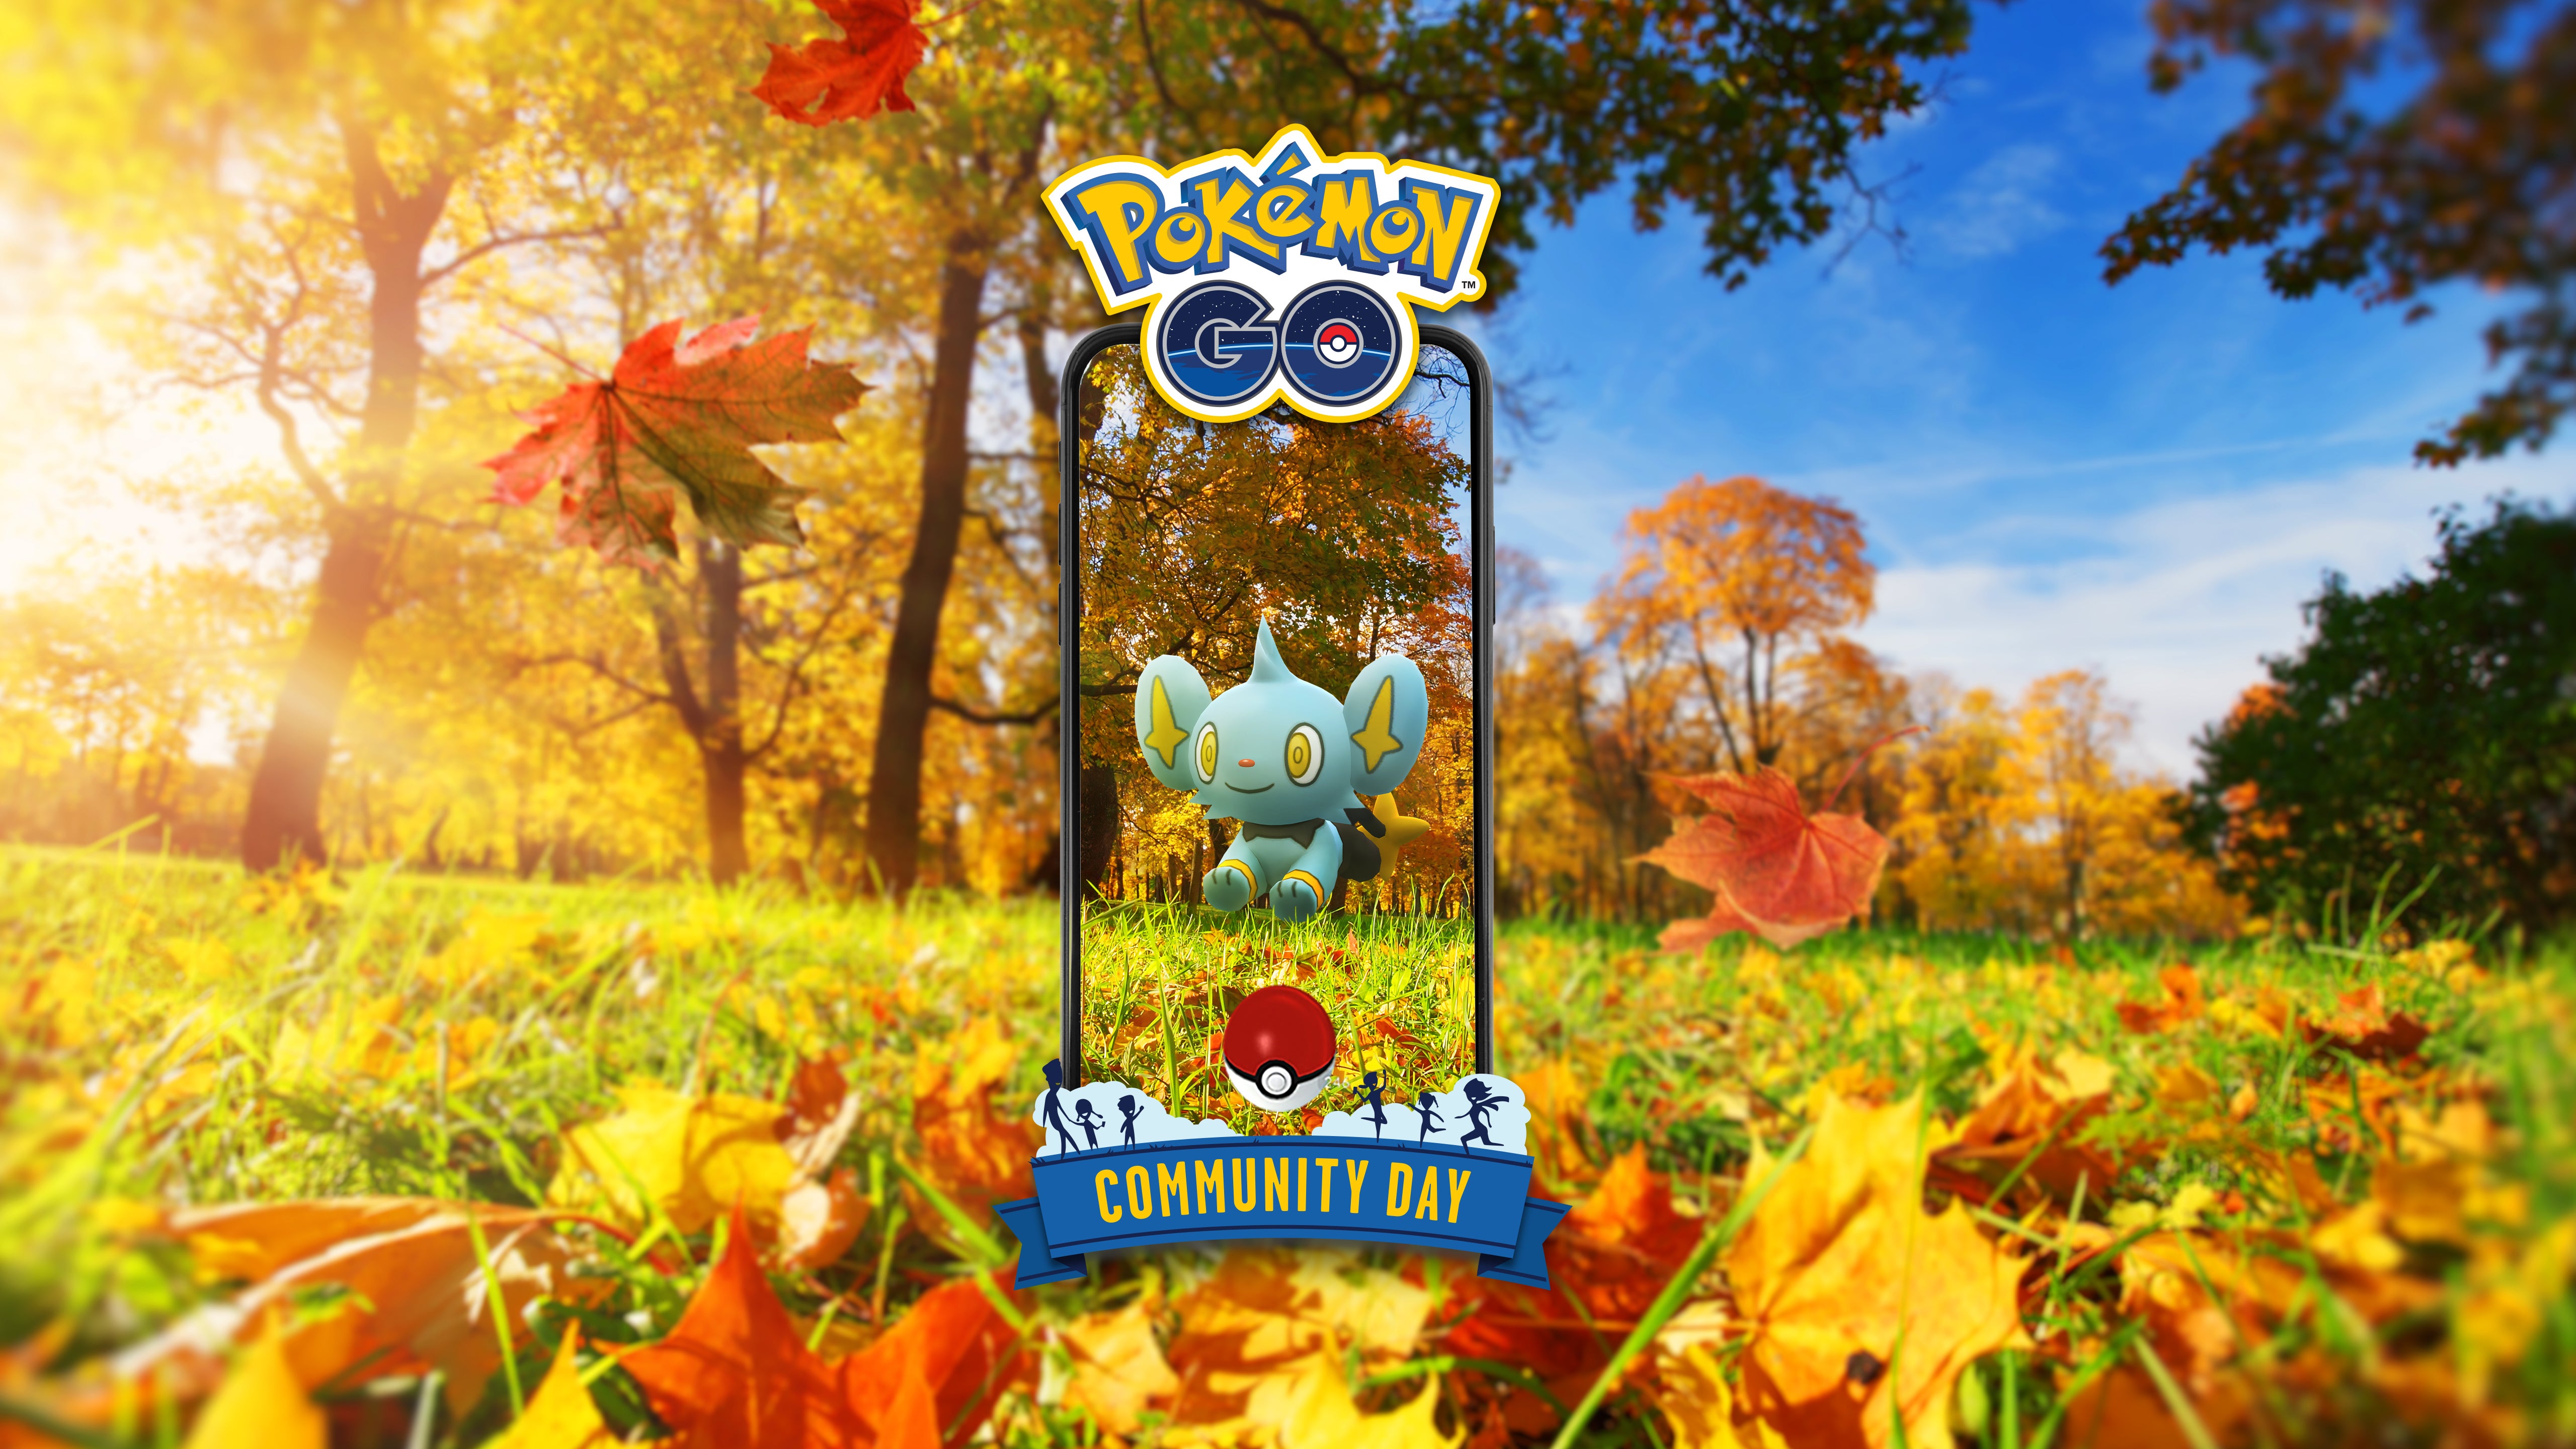 Pokemon Go Festival of Lights and Shinx Community Day coming in